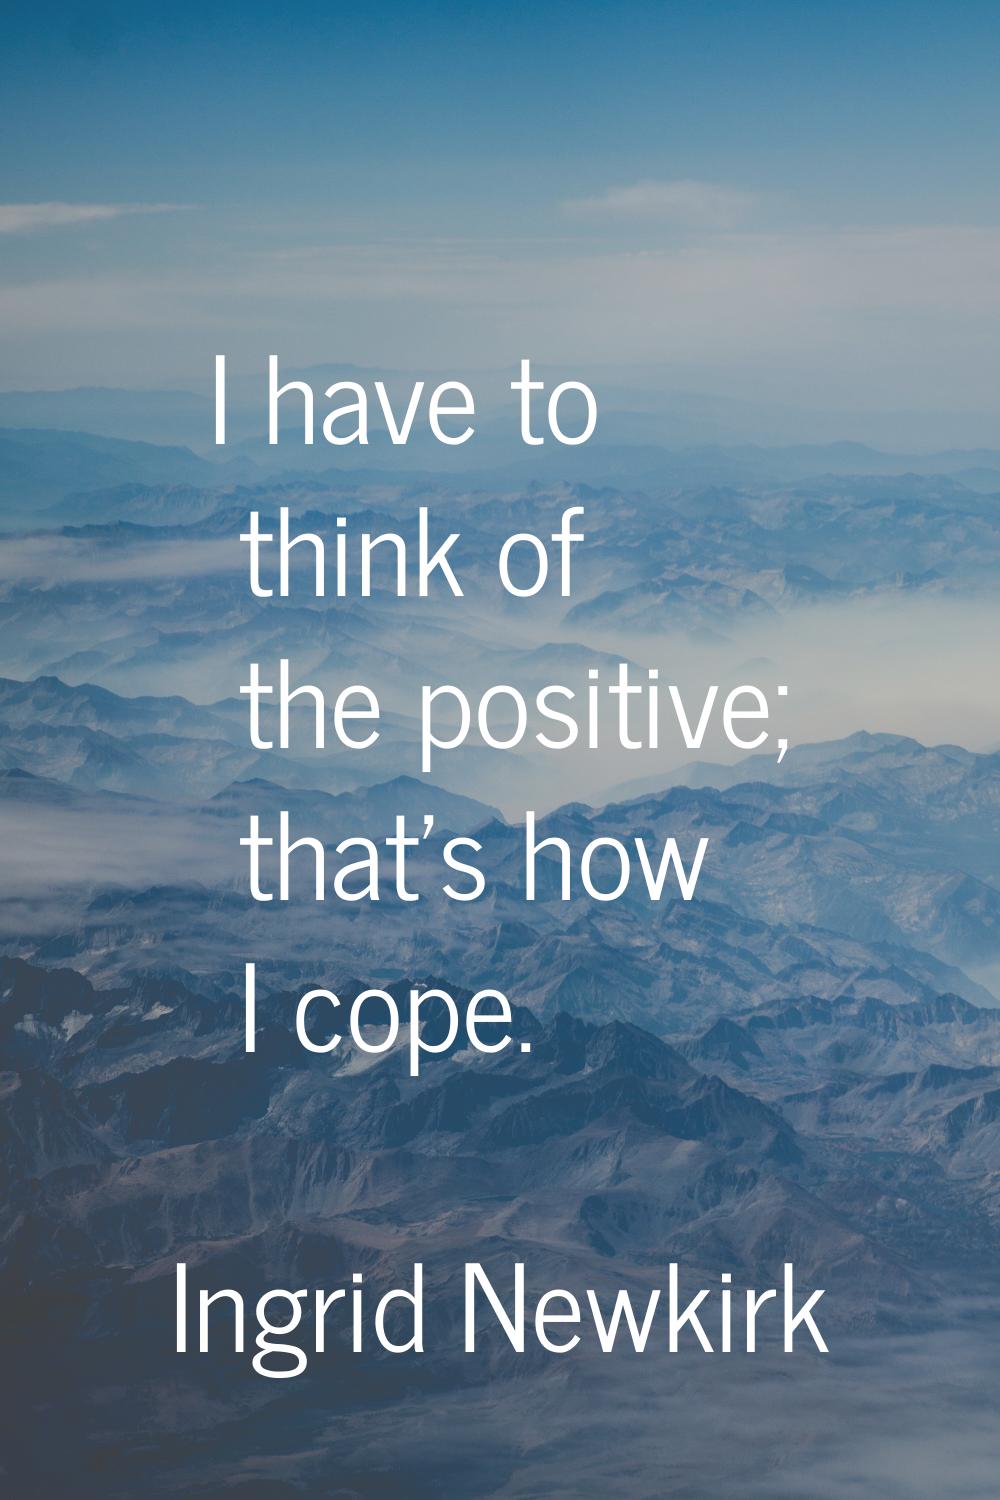 I have to think of the positive; that's how I cope.